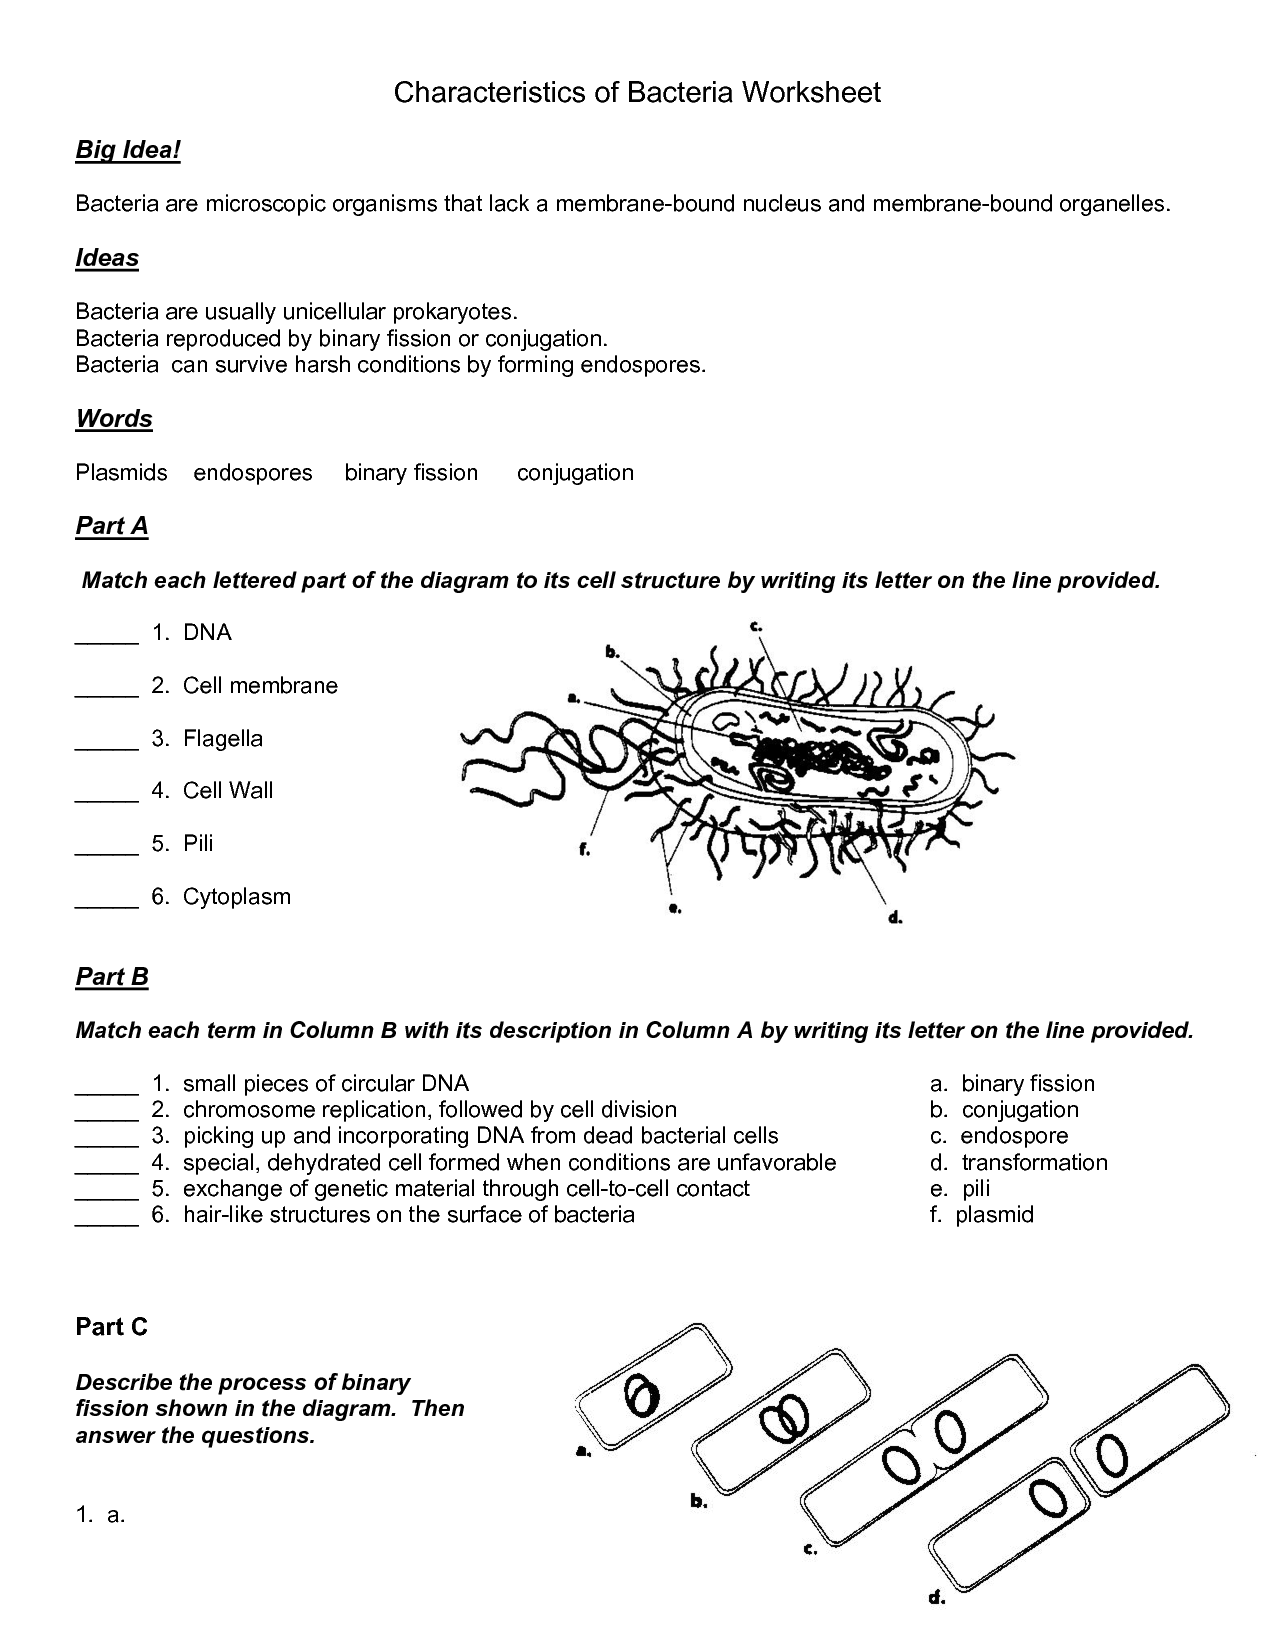 14 Best Images of Viruses And Bacteria Worksheets  Bacteria and Viruses Worksheet Answers 